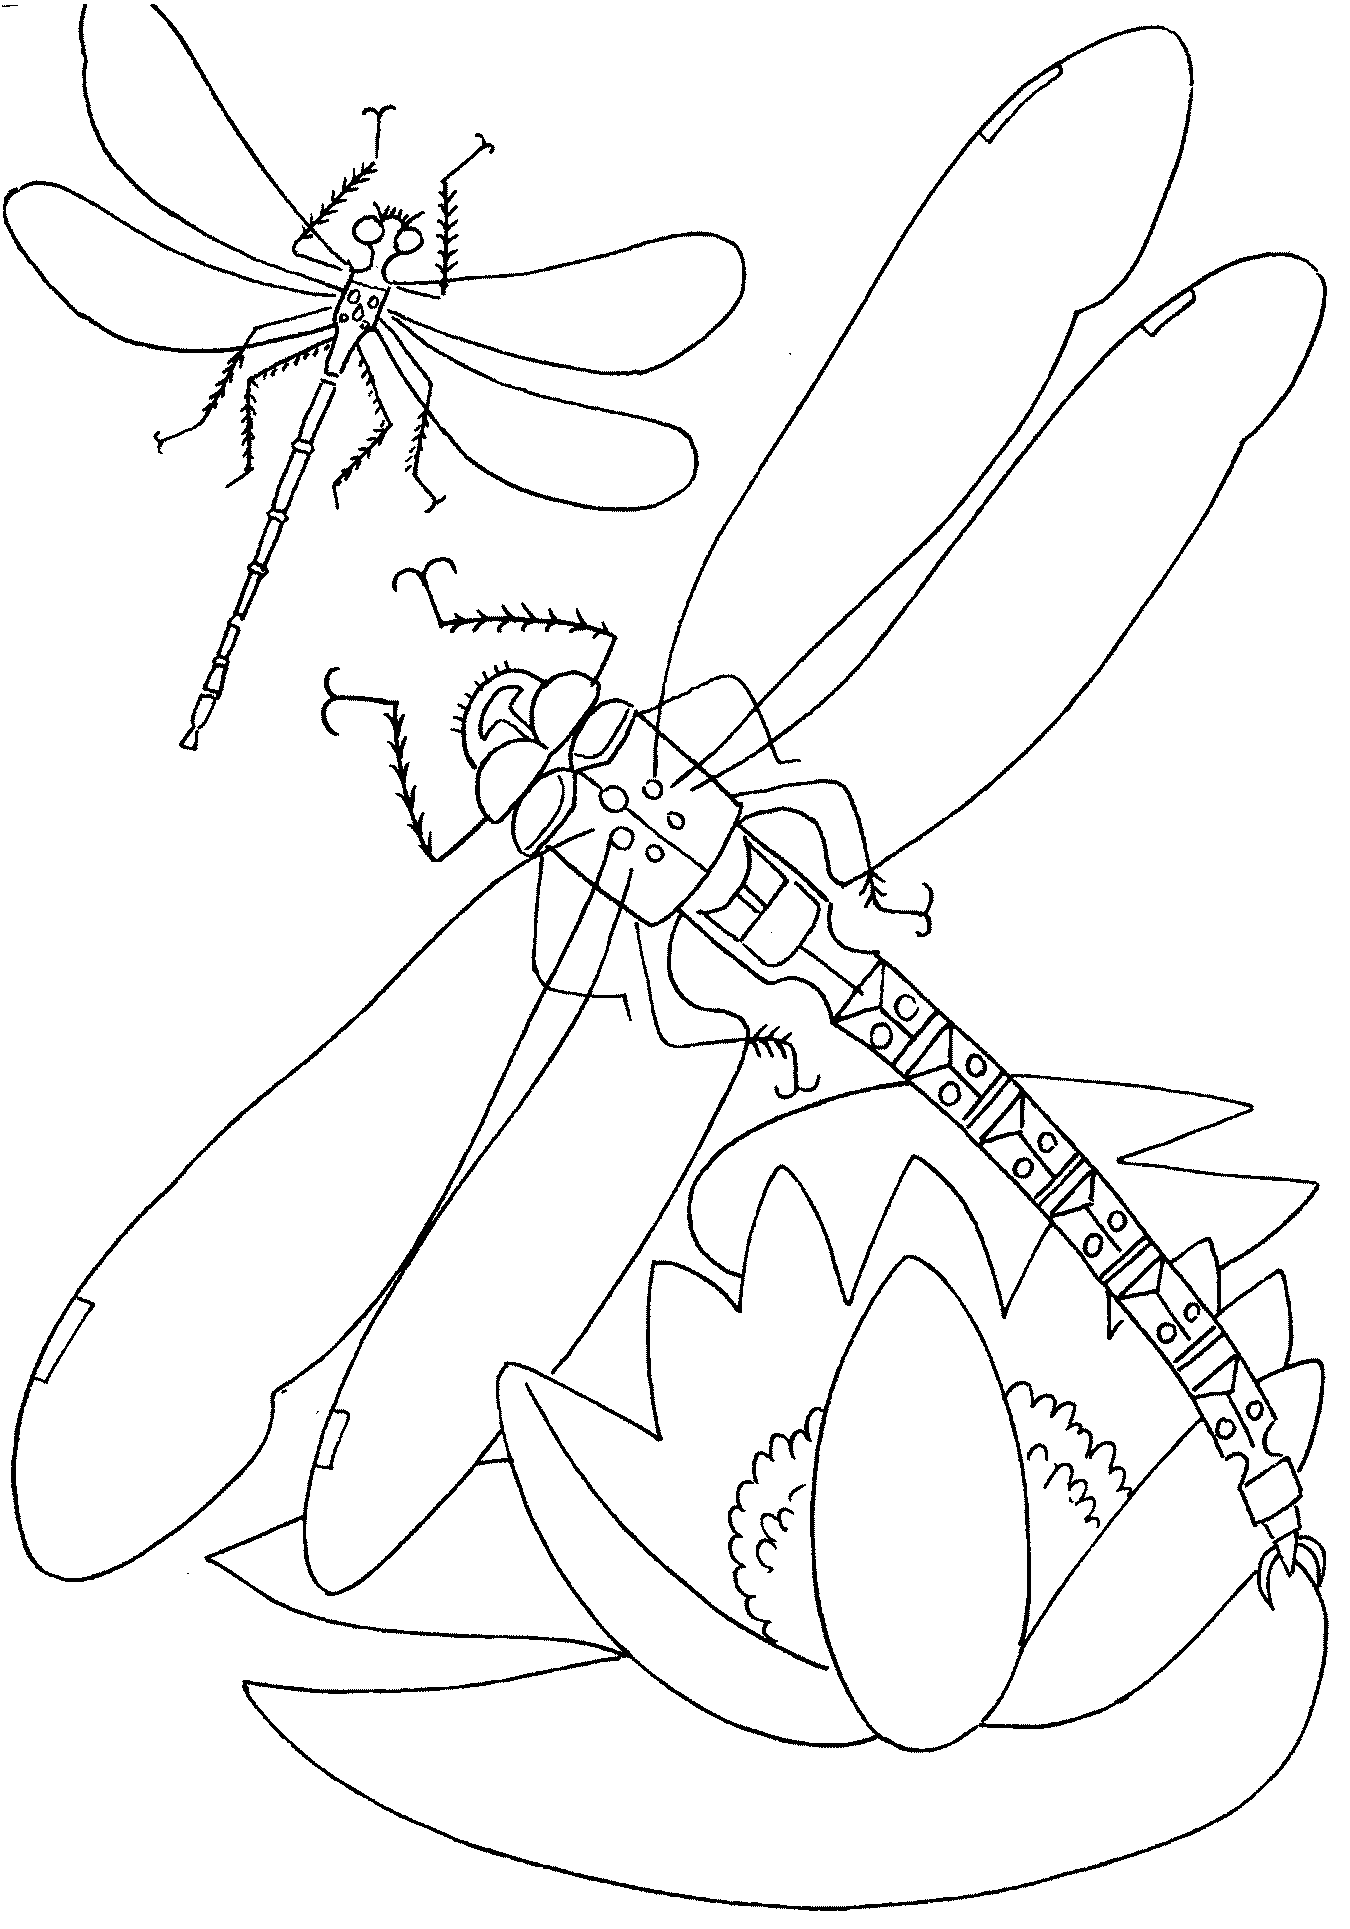 dragonfly coloring page dragonflies adult coloring page digital stamp dragonfly coloring page 